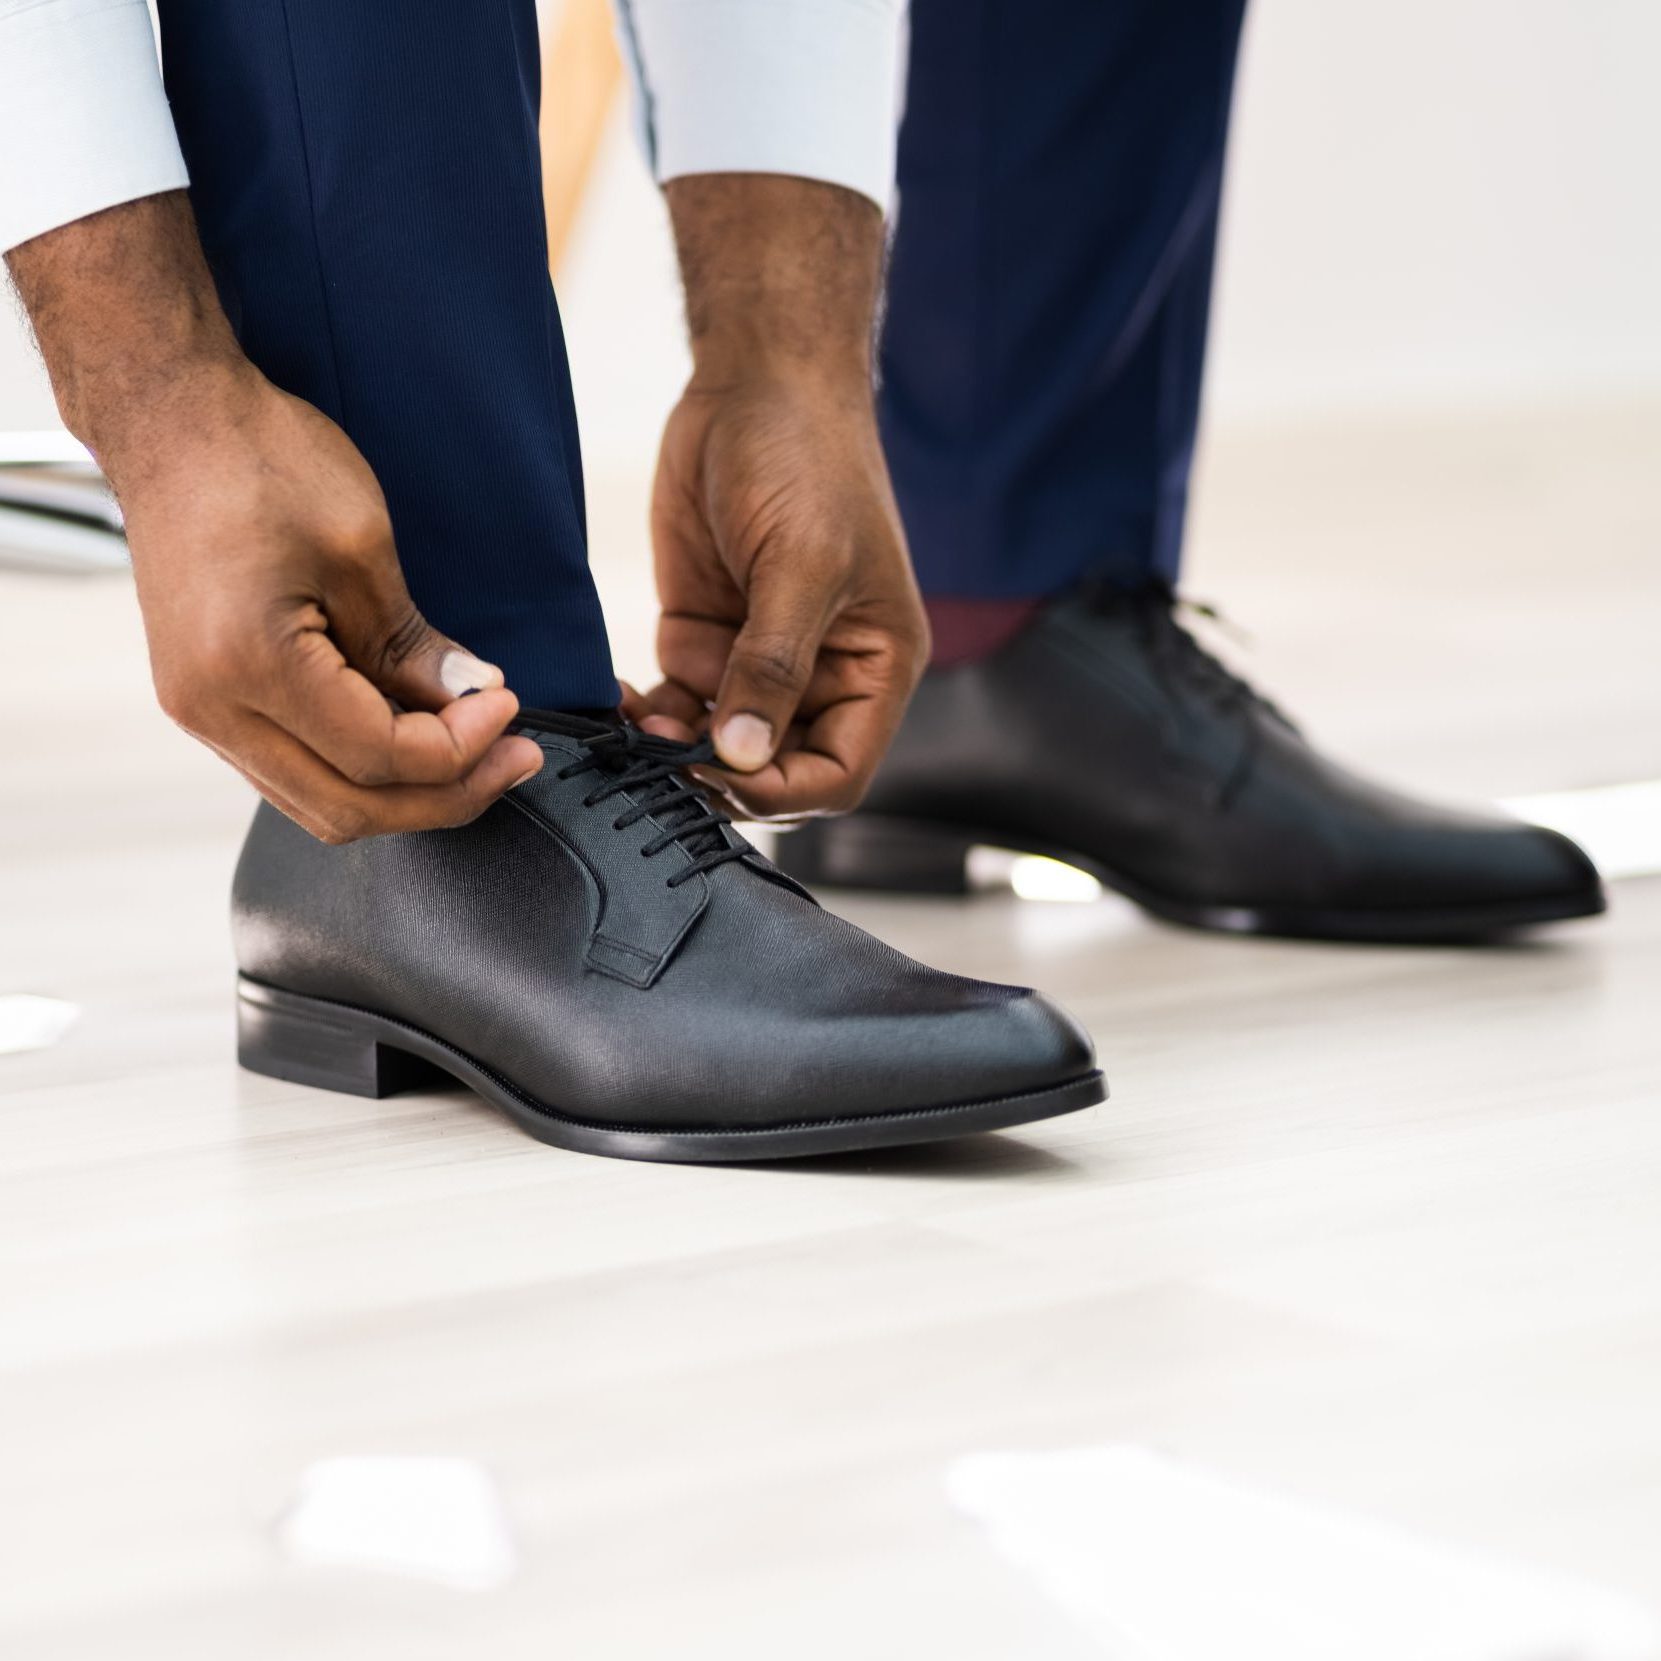 8 Of The Best Office Shoes For Men